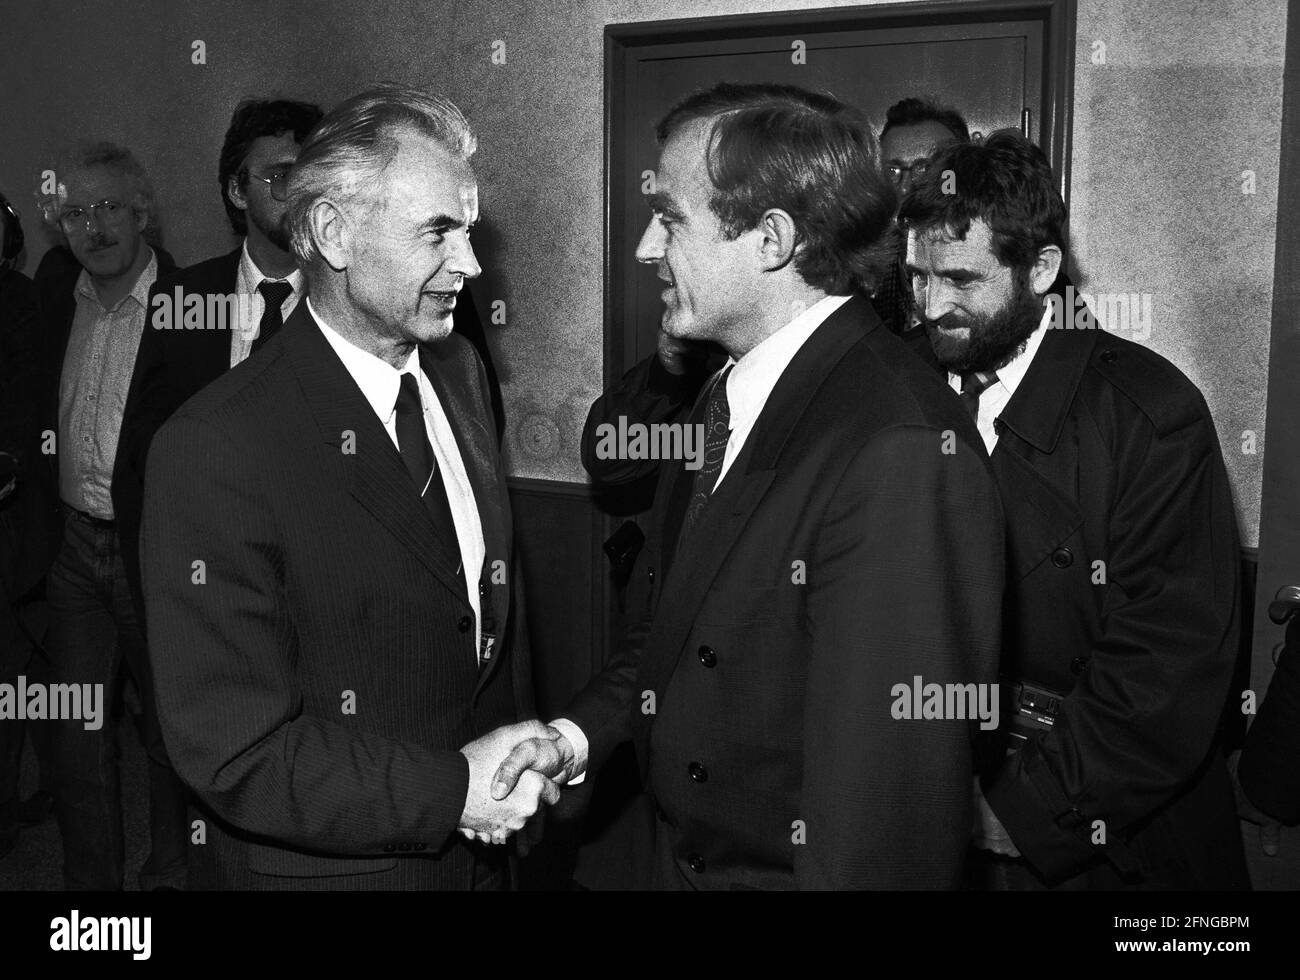 Germany, East-Berlin, 23.01.1990. Archive-No.: 12-48 Visit of Minister of Economics Haussmann to East-Berlin Photo: GDR Prime Minister Hans Modrow greets Federal Minister of Economics Helmut Haussmann [automated translation] Stock Photo